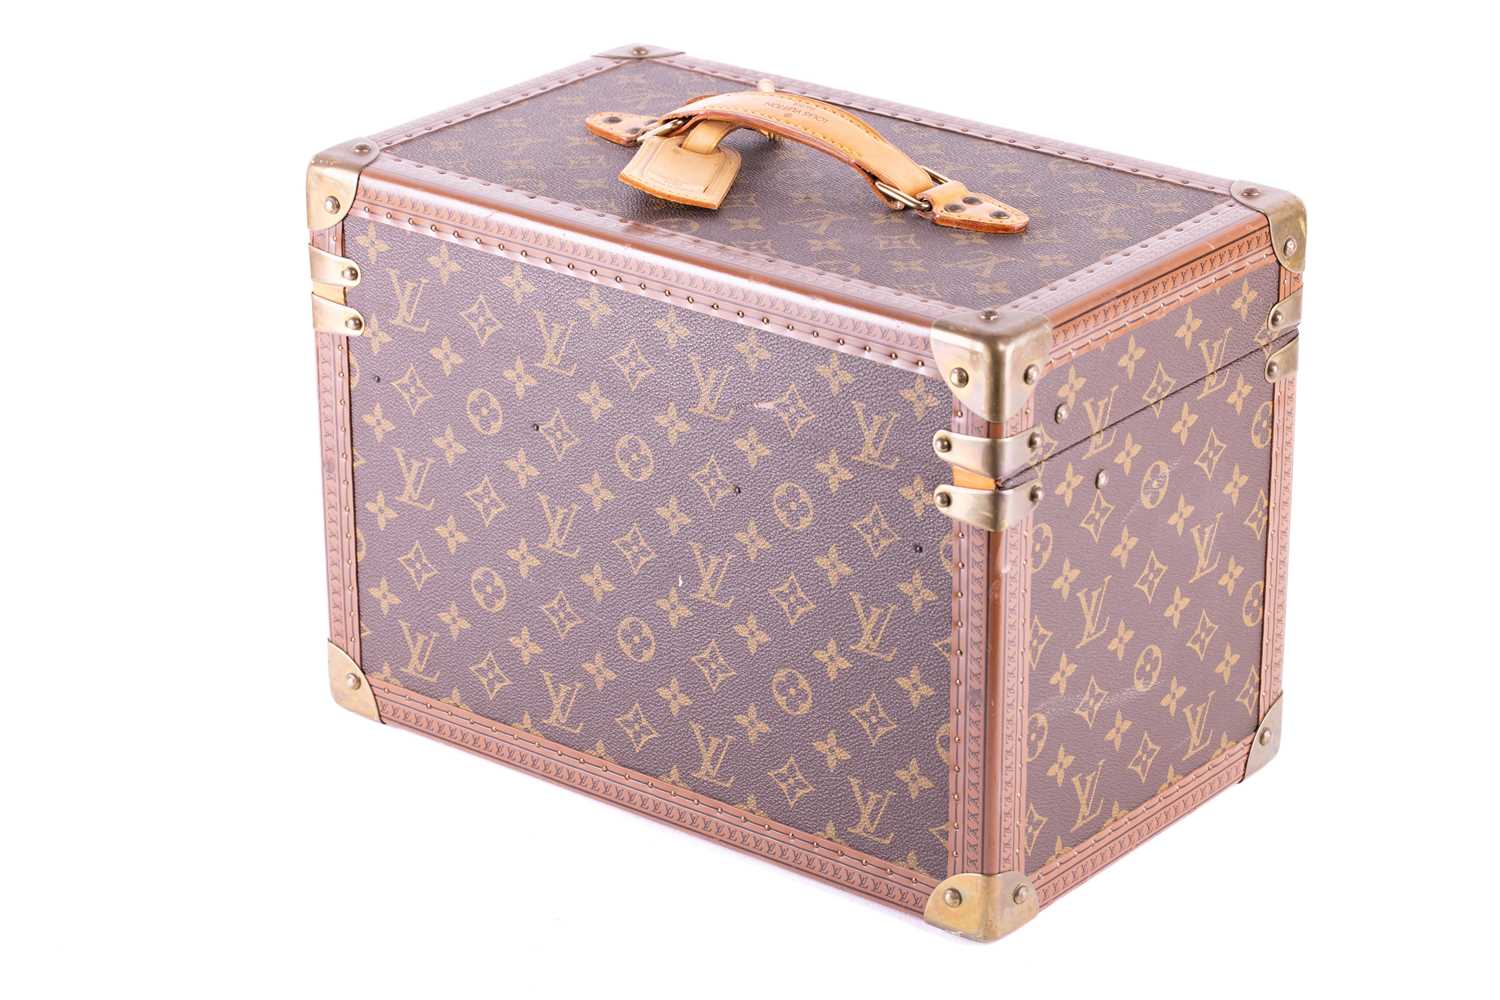 Louis Vuitton - a 'Boîte à Pharmacie' (pharmacy box) vanity case, in brown monogram canvas, brass lo - Image 4 of 15